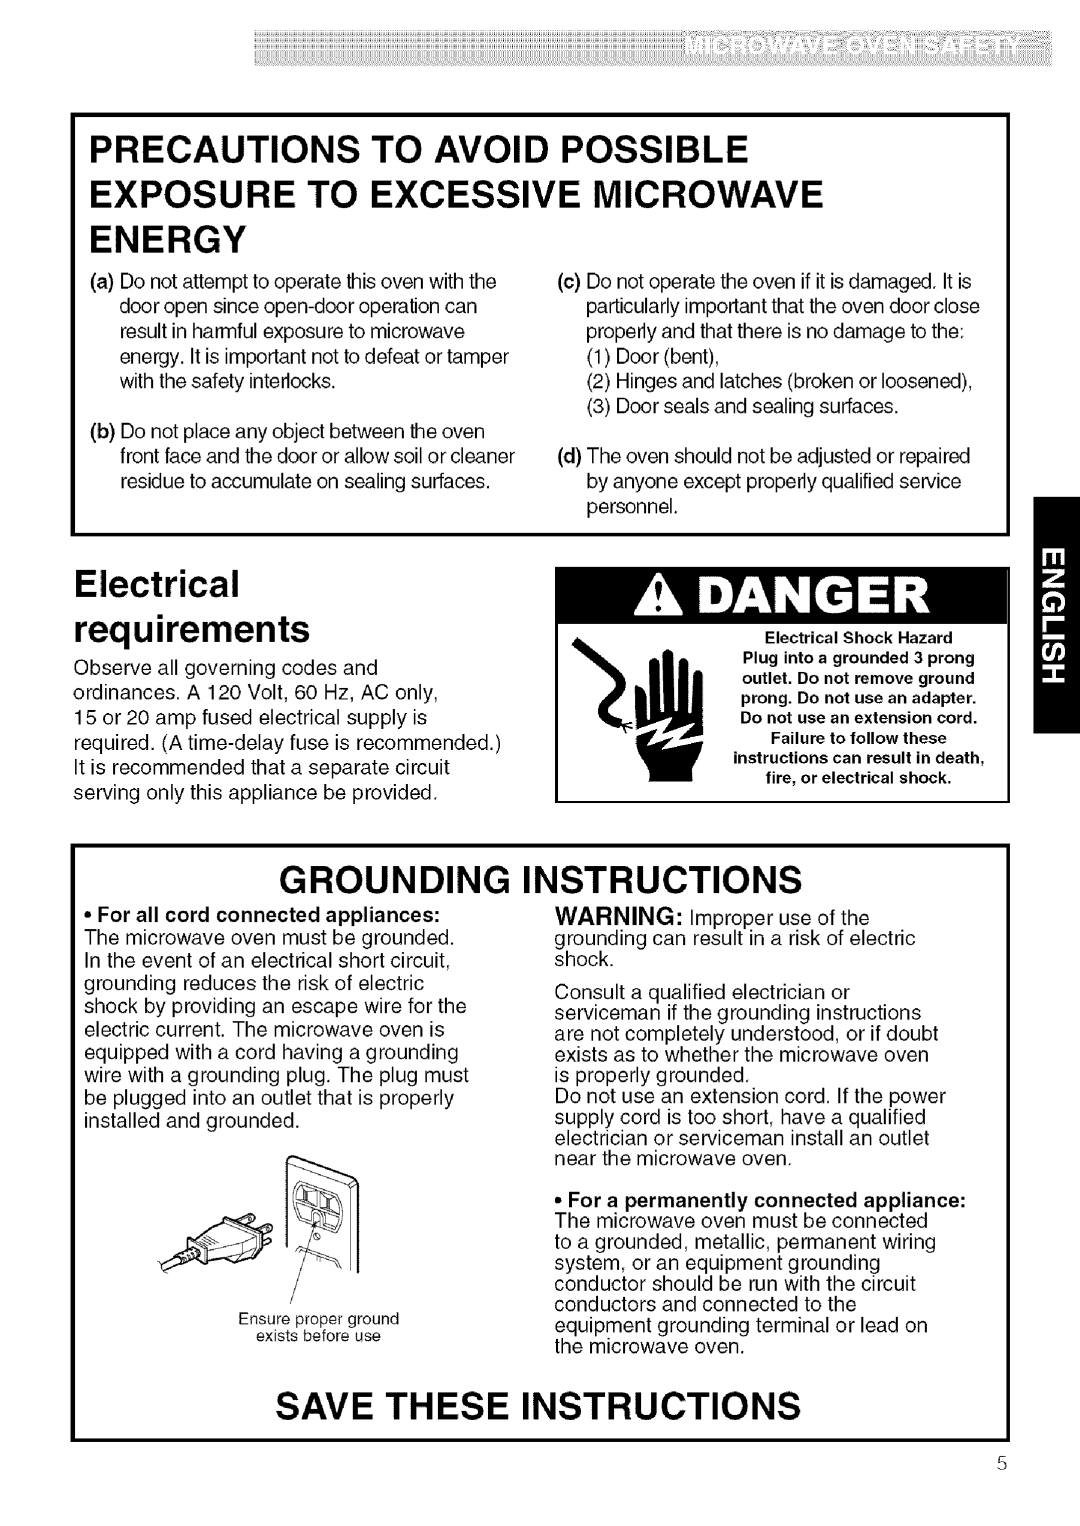 Kenmore 721.80602, 721.80603 Precautions To Avoid Possible, Exposure To Excessive Microwave, Energy, Electrical, Grounding 